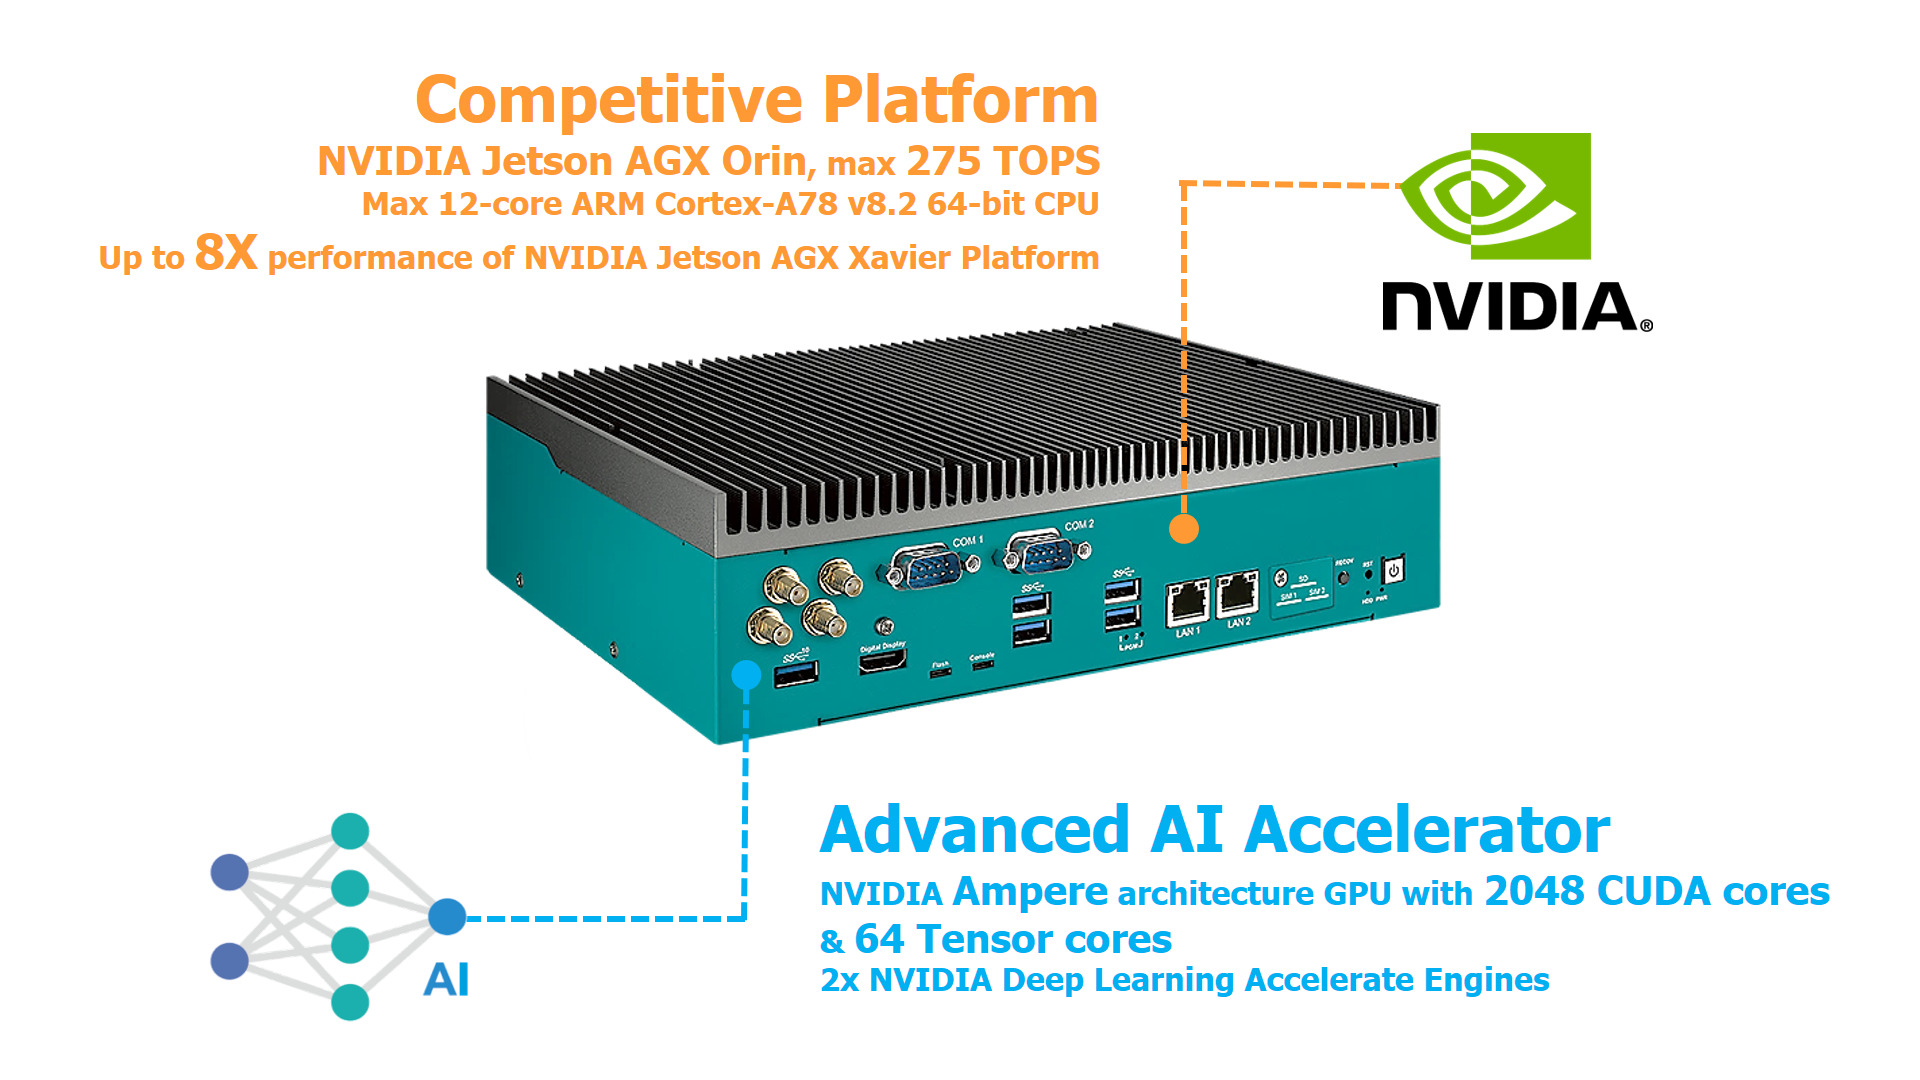 Vecow EAC-5000 Features NVIDIA Jetson AGX Orin SoM, Offering Server-Class Performance for Edge AI Applications